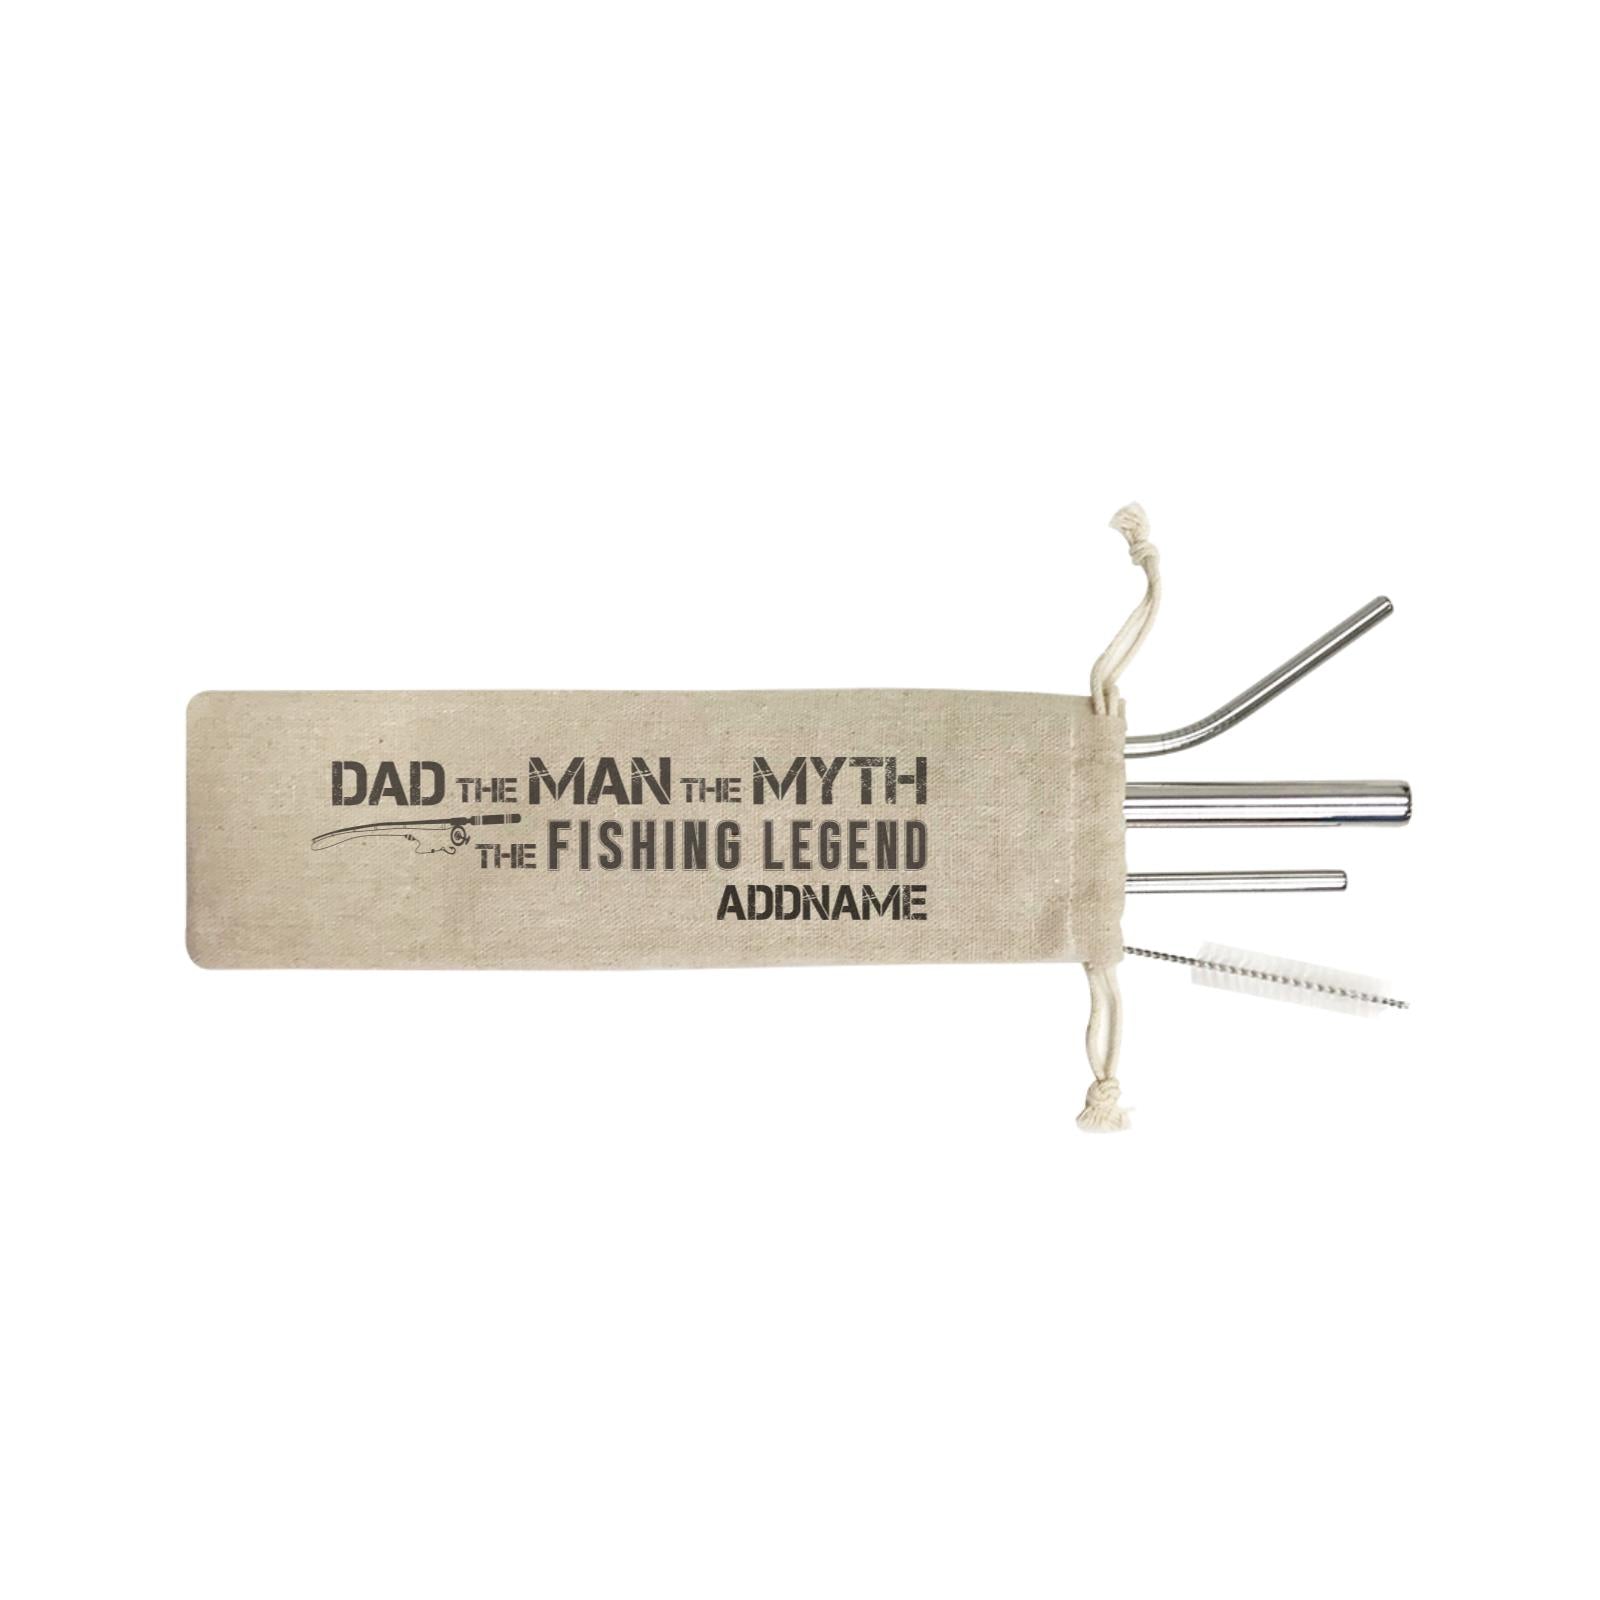 Dad The Man The Myth The Fishing Legend Addname SB 4-In-1 Stainless Steel Straw Set in Satchel